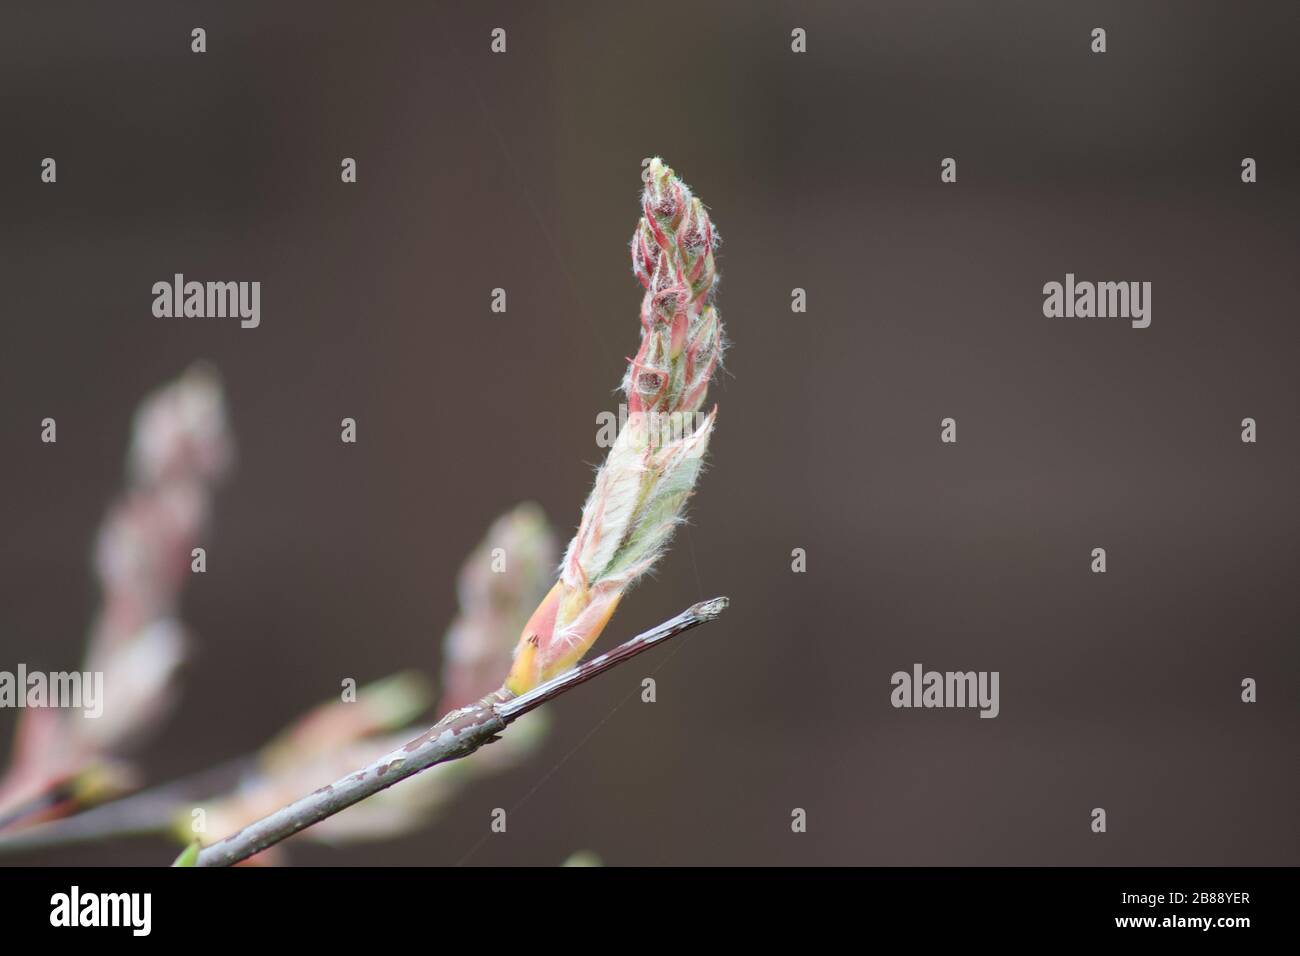 Amelanchier fresh bud growth in spring Stock Photo